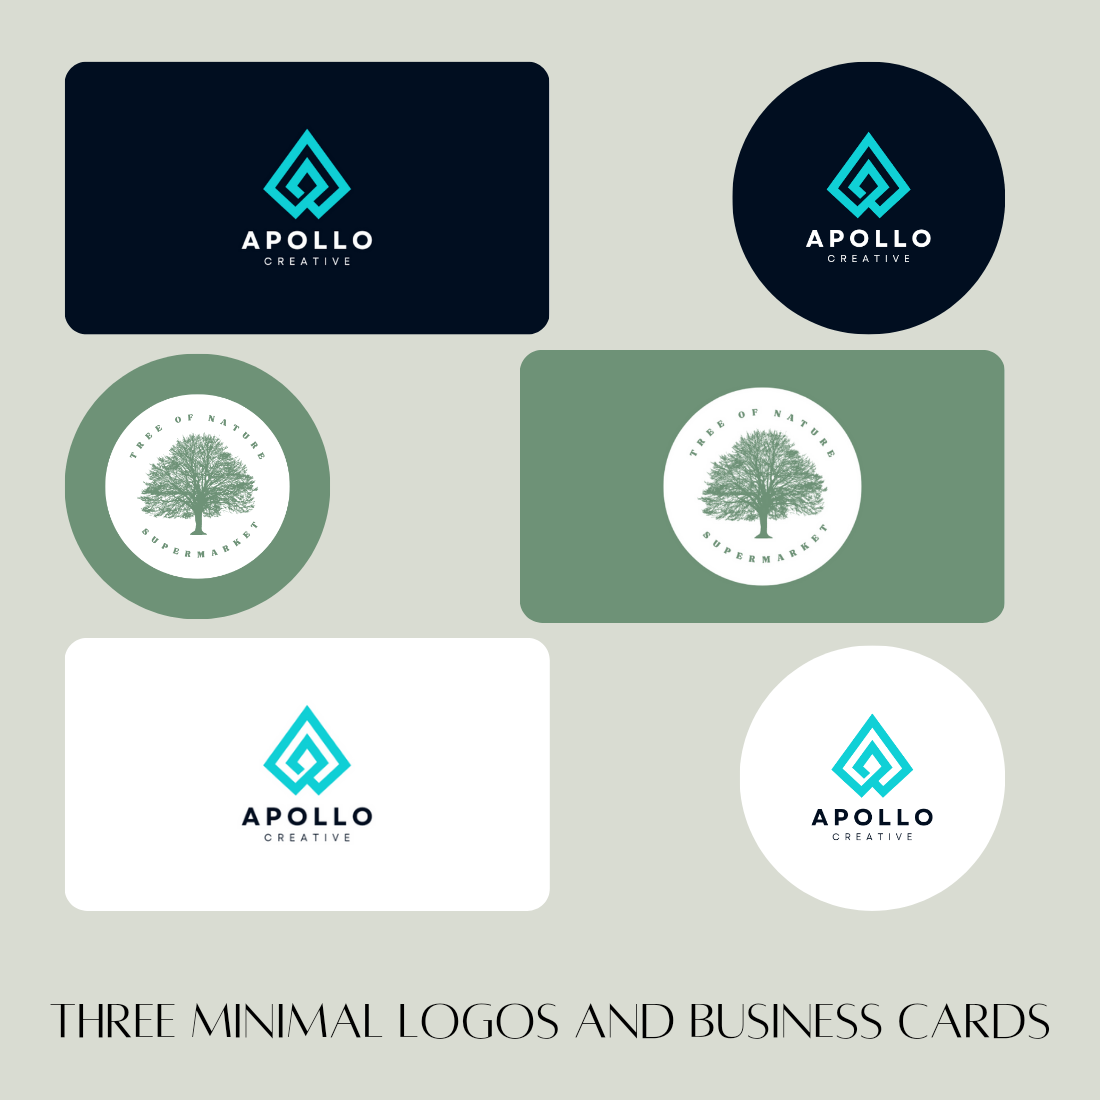 Pack of 3 Minimal and Creative Business Logo and Cards cover image.